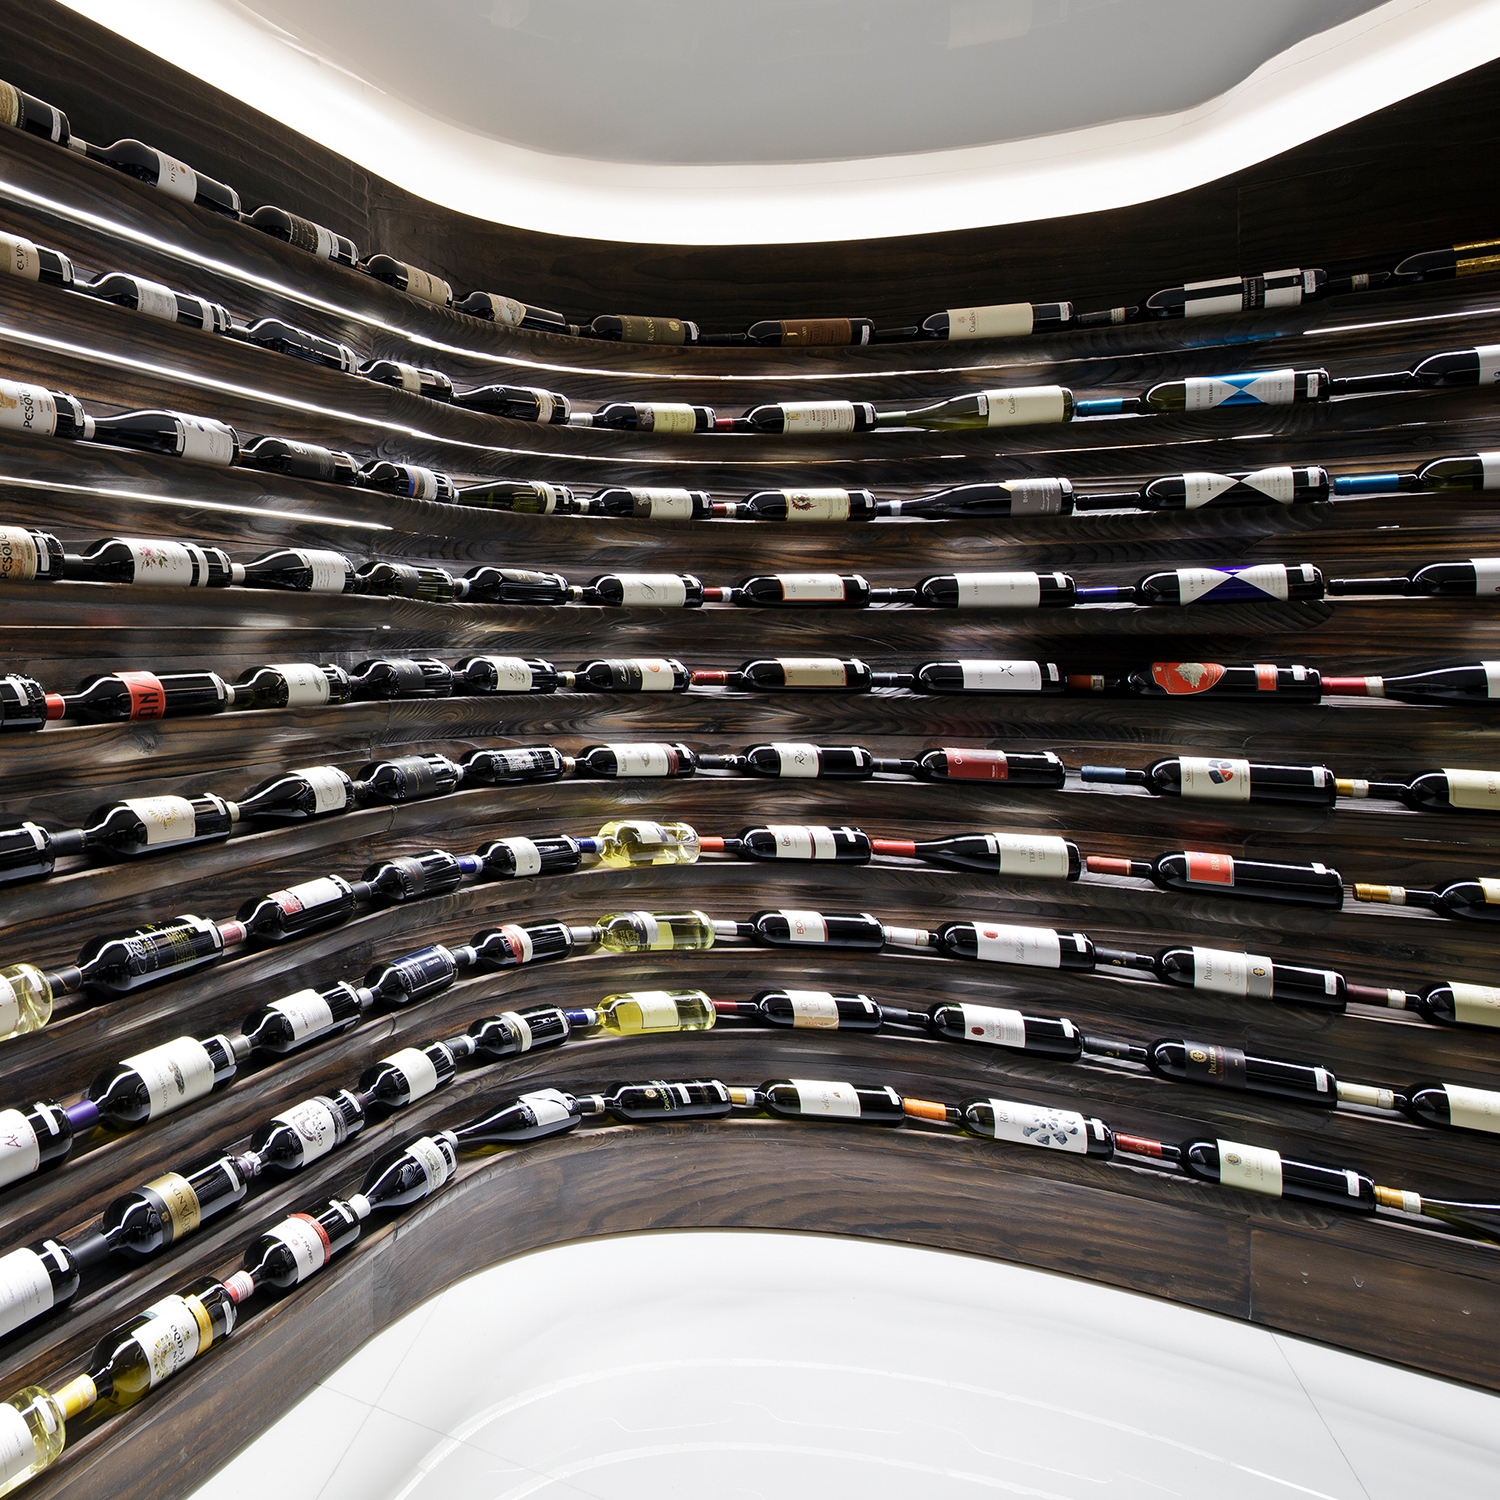 Top 4 Tips For Installing A Wine Cabinet In Your Home